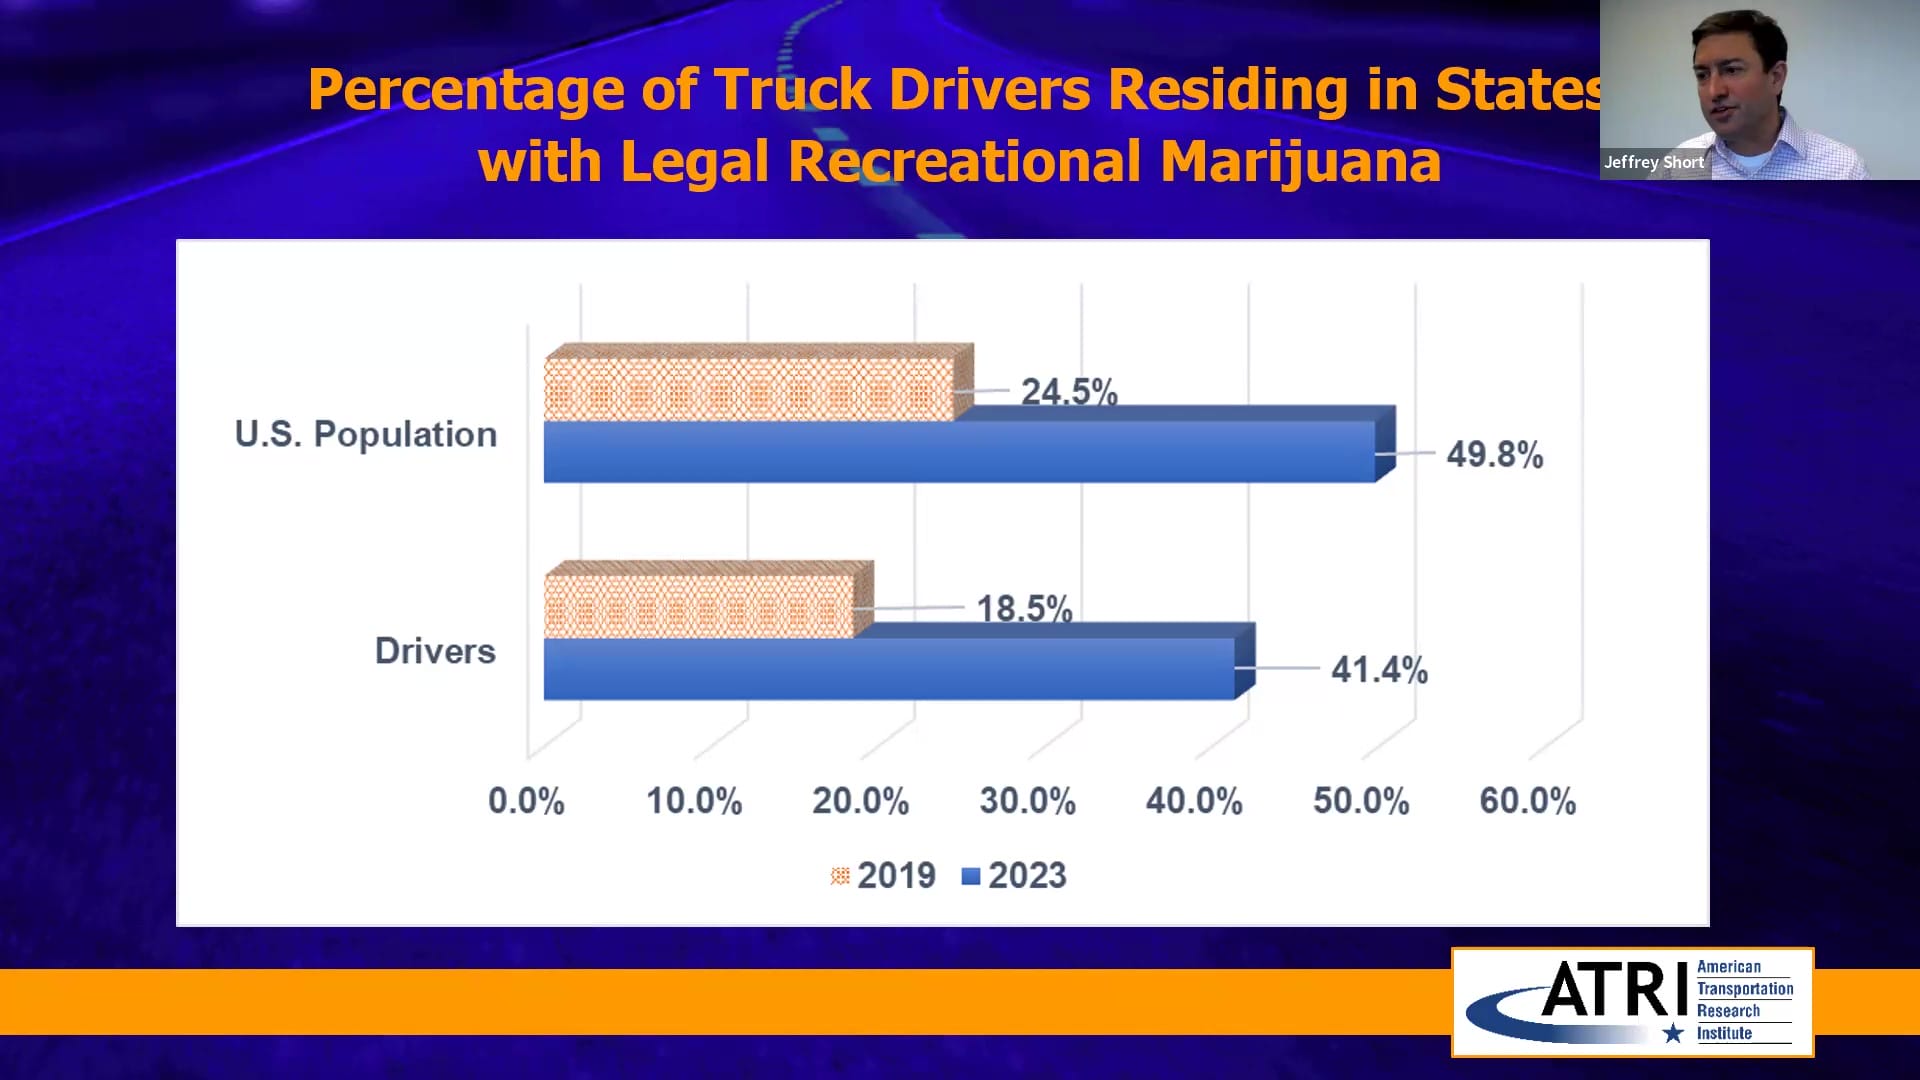 Percentage of Truck Drivers Residing in States with Legal Recreational Marijuana